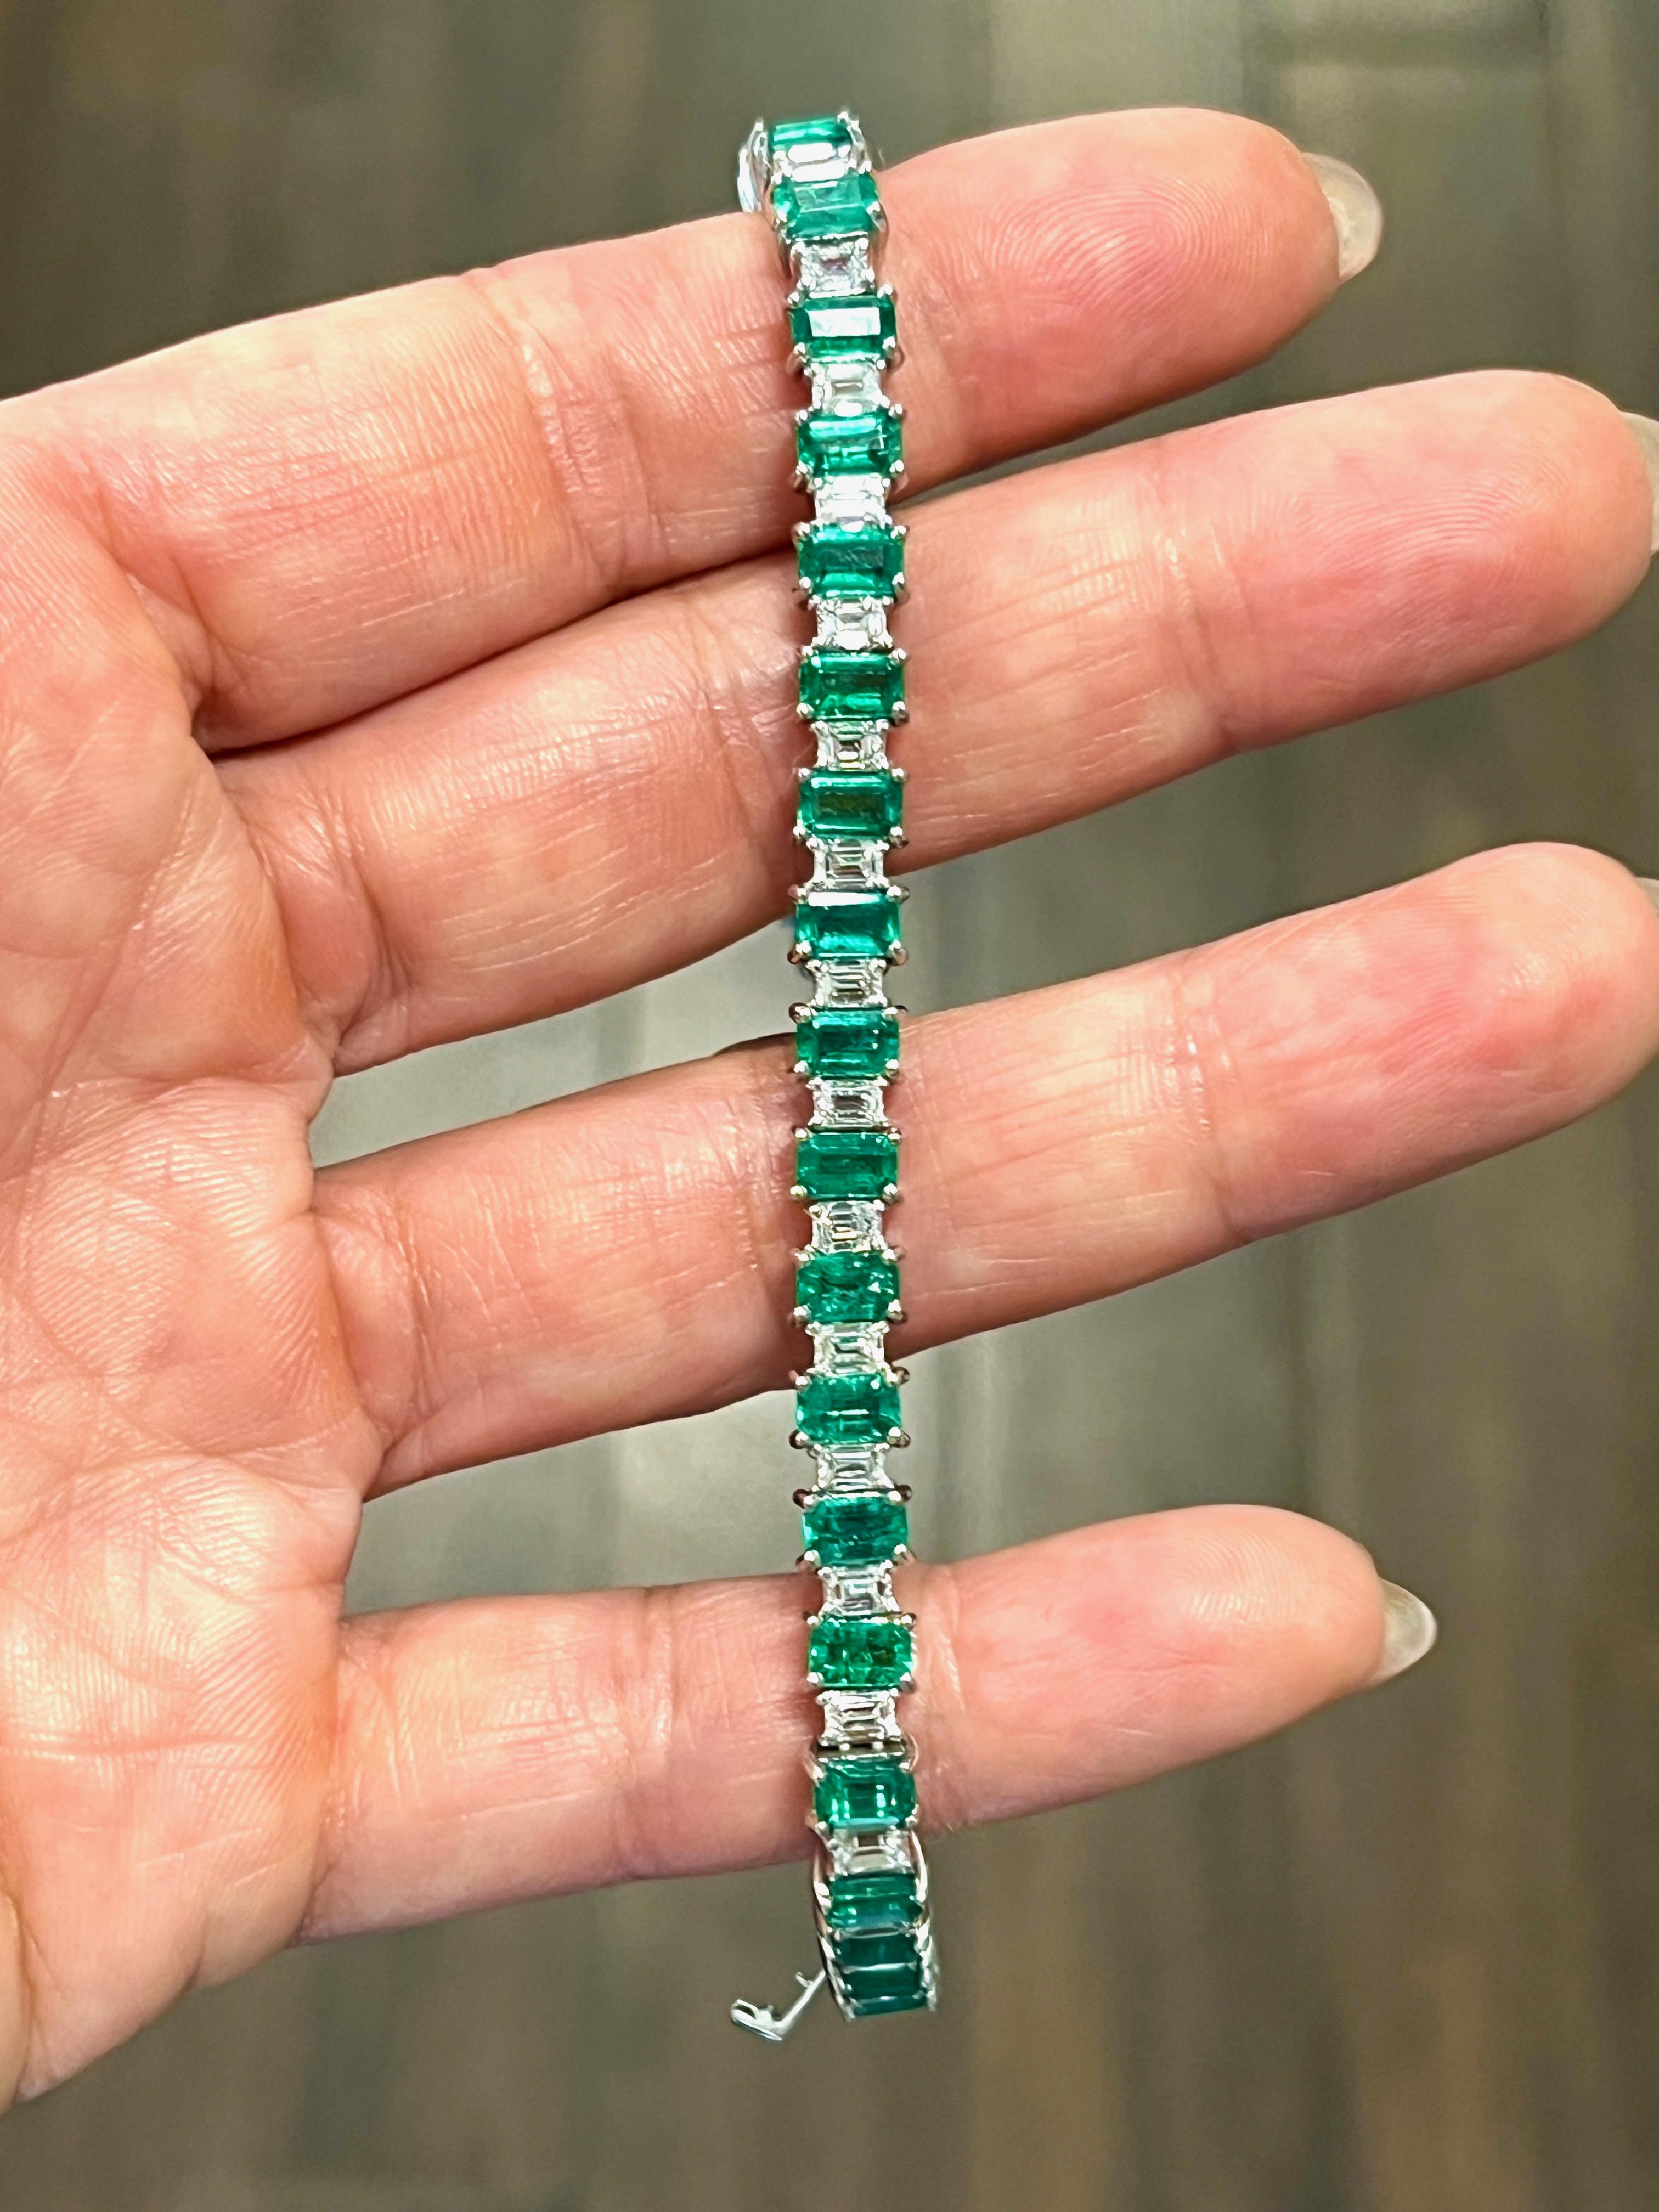 This bracelet features 31 natural emerald cut emeralds weighing 8.71 ct. The bracelet also features 31 baguette-shaped diamonds weighing 3.55 ct and are graded E/F in color and VVS2/VS1 in clarity. The bracelet is 7 inches long and is set in